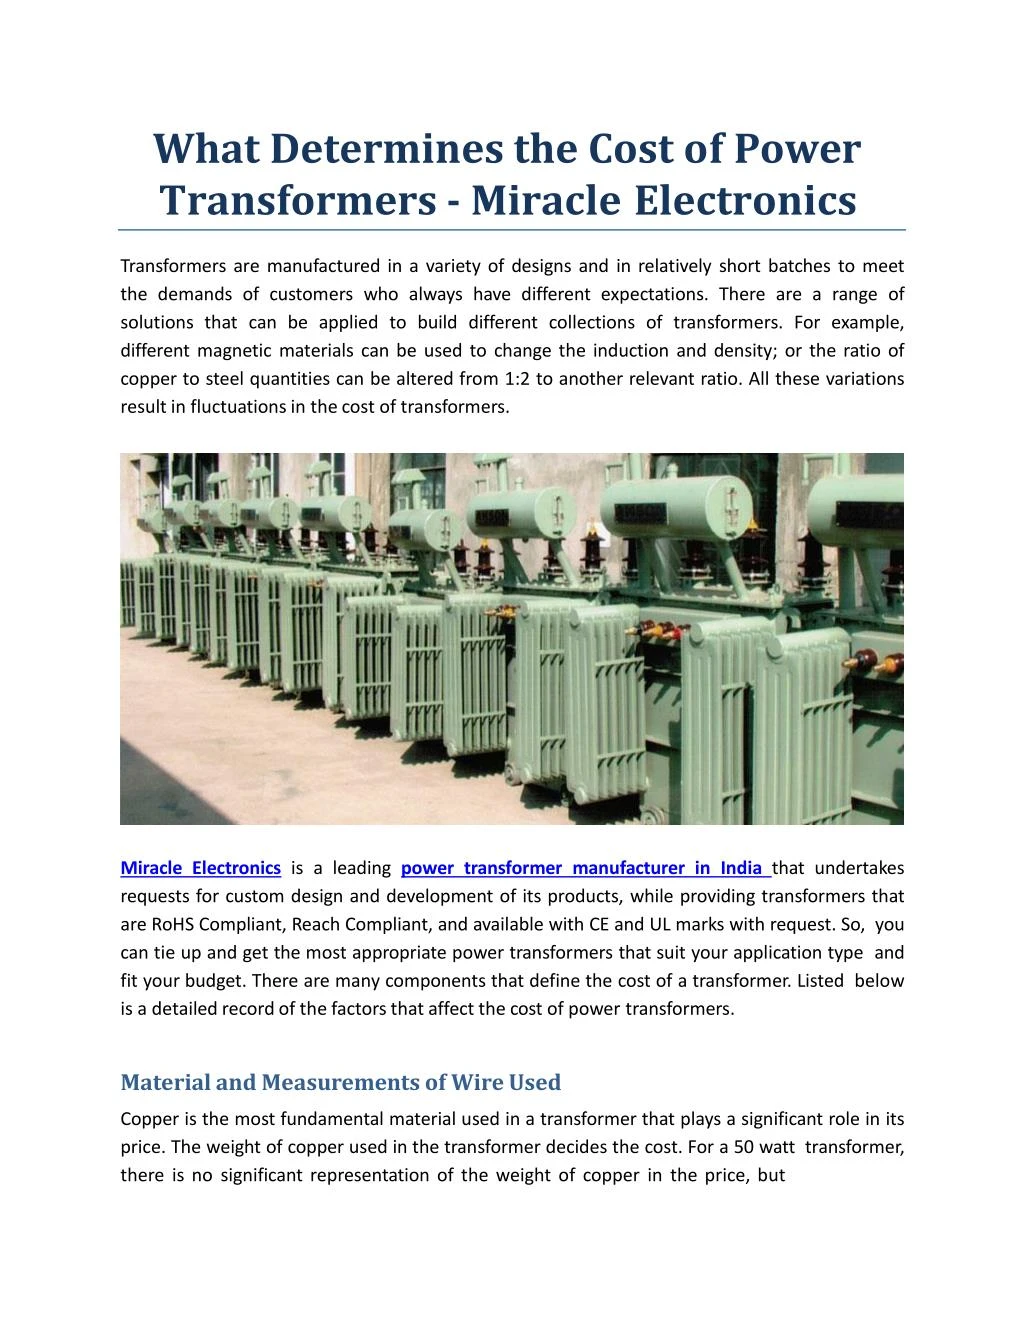 what determines the cost of power transformers miracle electronics